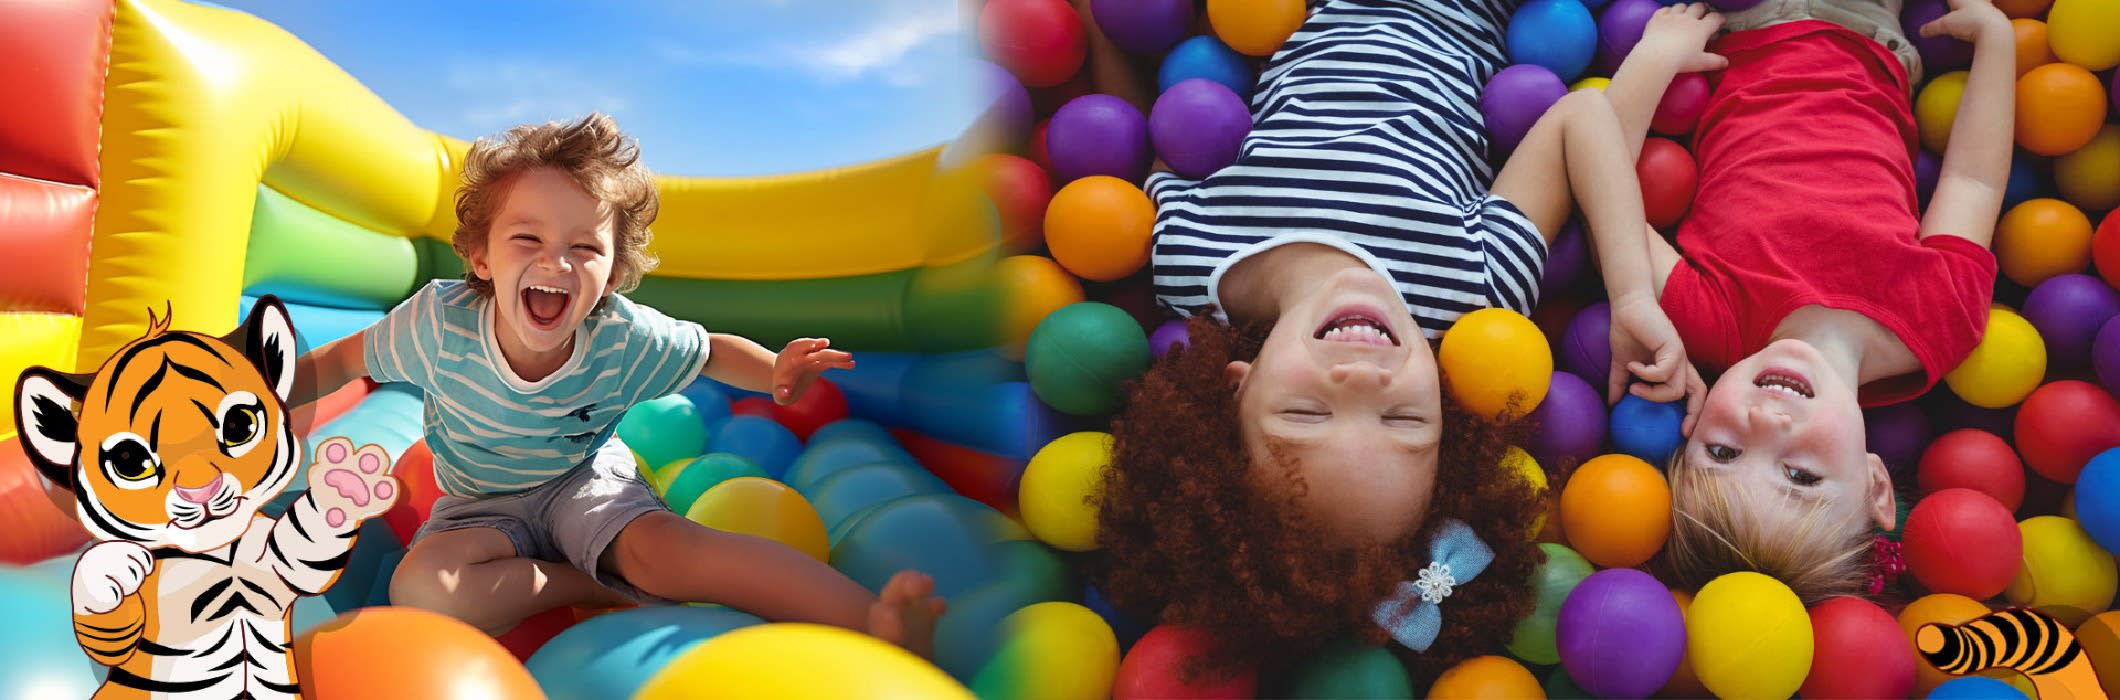 Tiger Tots Bouncy Castles And Soft Play Hire, Based In The Heart Of Spalding, Lincolnshire